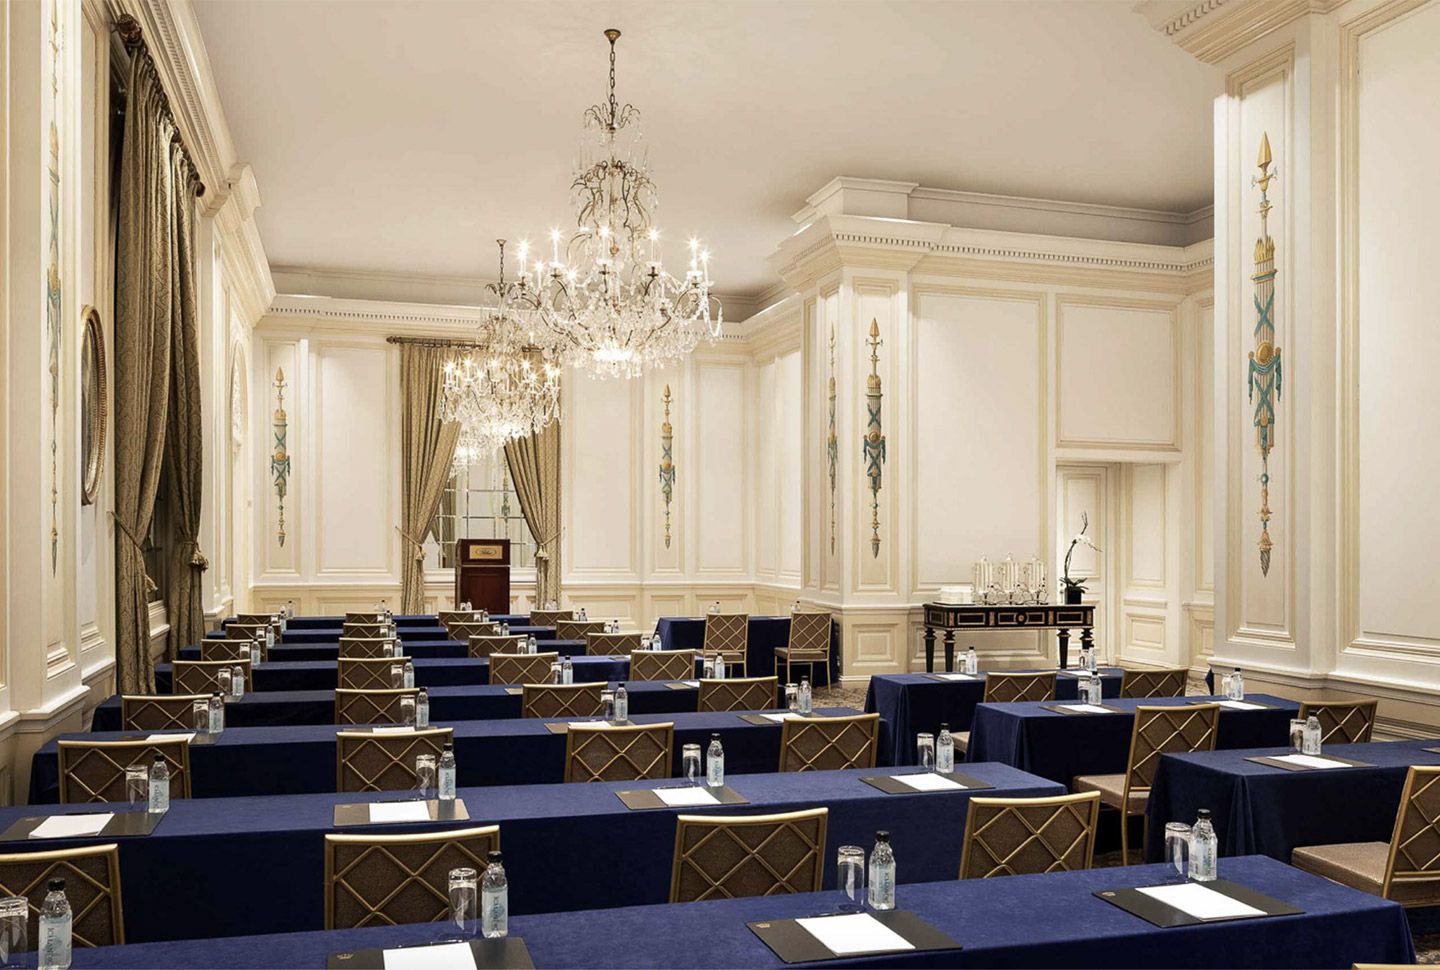 Lotte-New-York-Palace-Function-Room.jpg